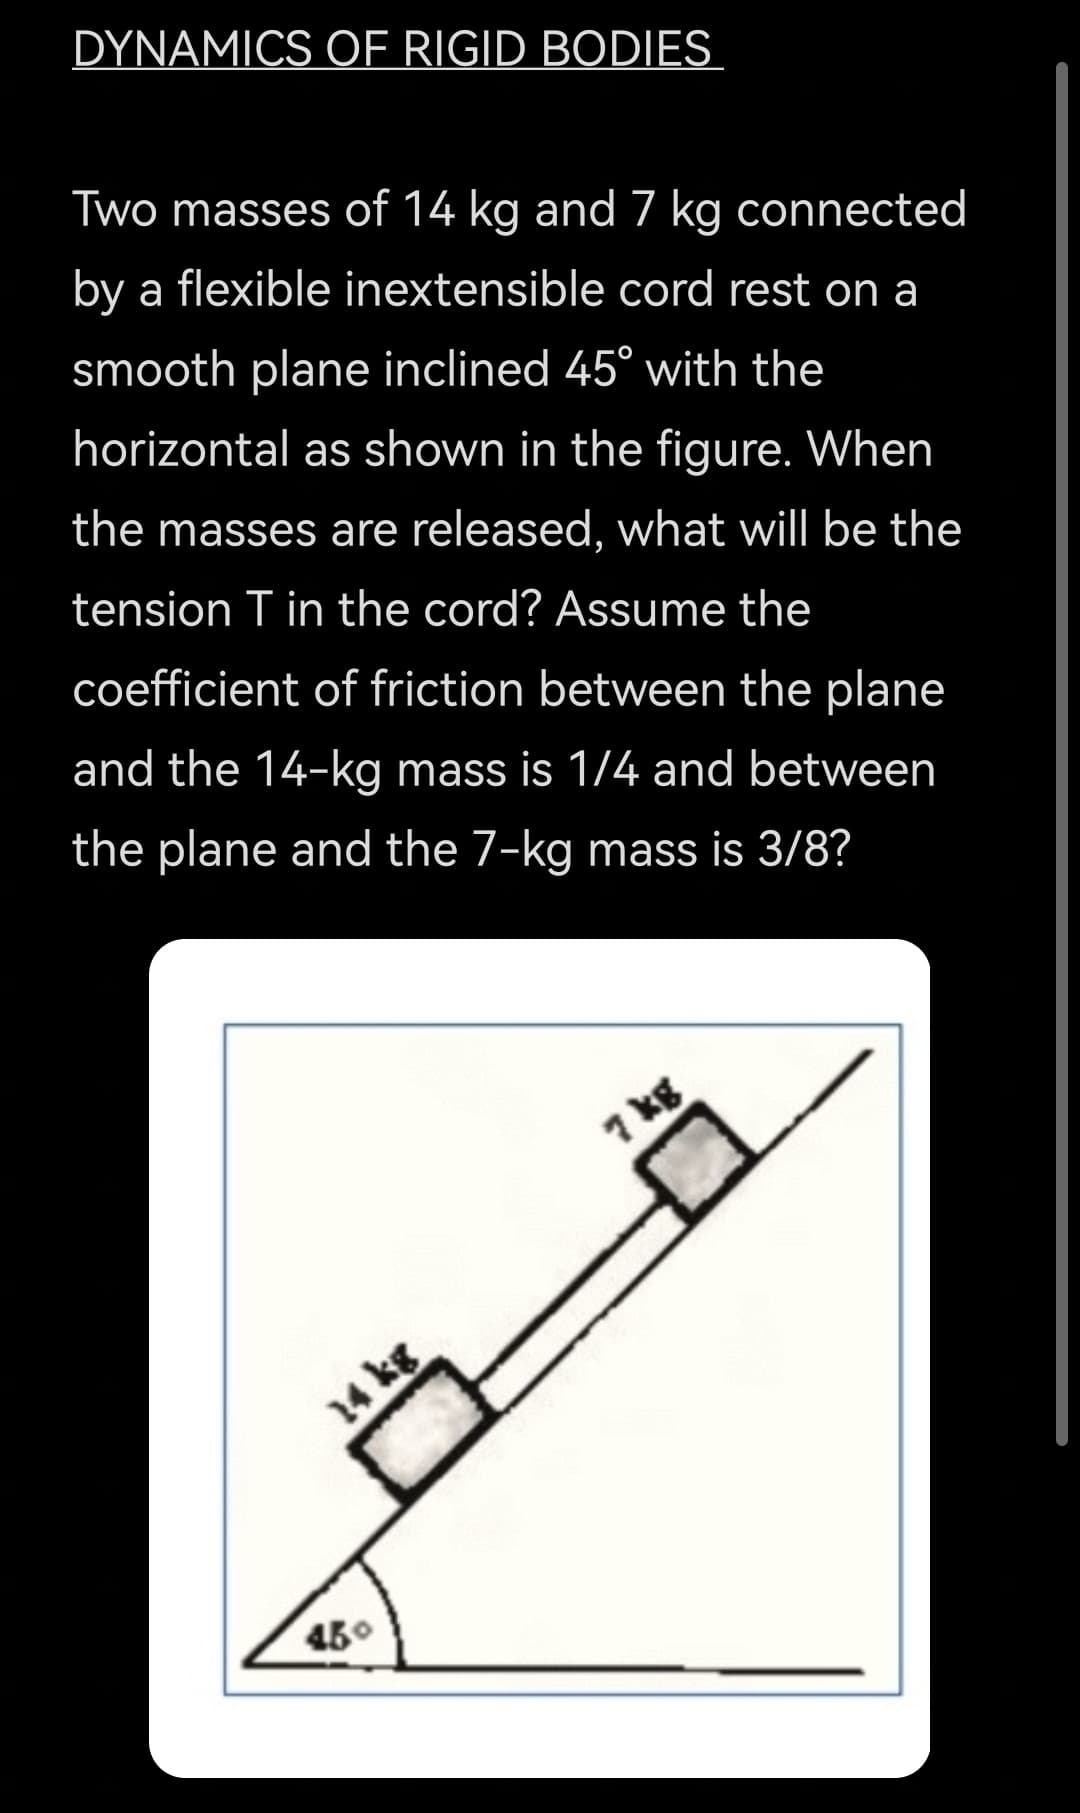 DYNAMICS OF RIGID BODIES
Two masses of 14 kg and 7 kg connected
by a flexible inextensible cord rest on a
smooth plane inclined 45° with the
horizontal as shown in the figure. When
the masses are released, what will be the
tension T in the cord? Assume the
coefficient of friction between the plane
and the 14-kg mass is 1/4 and between
the plane and the 7-kg mass is 3/8?
7 kg
14 kg
450
